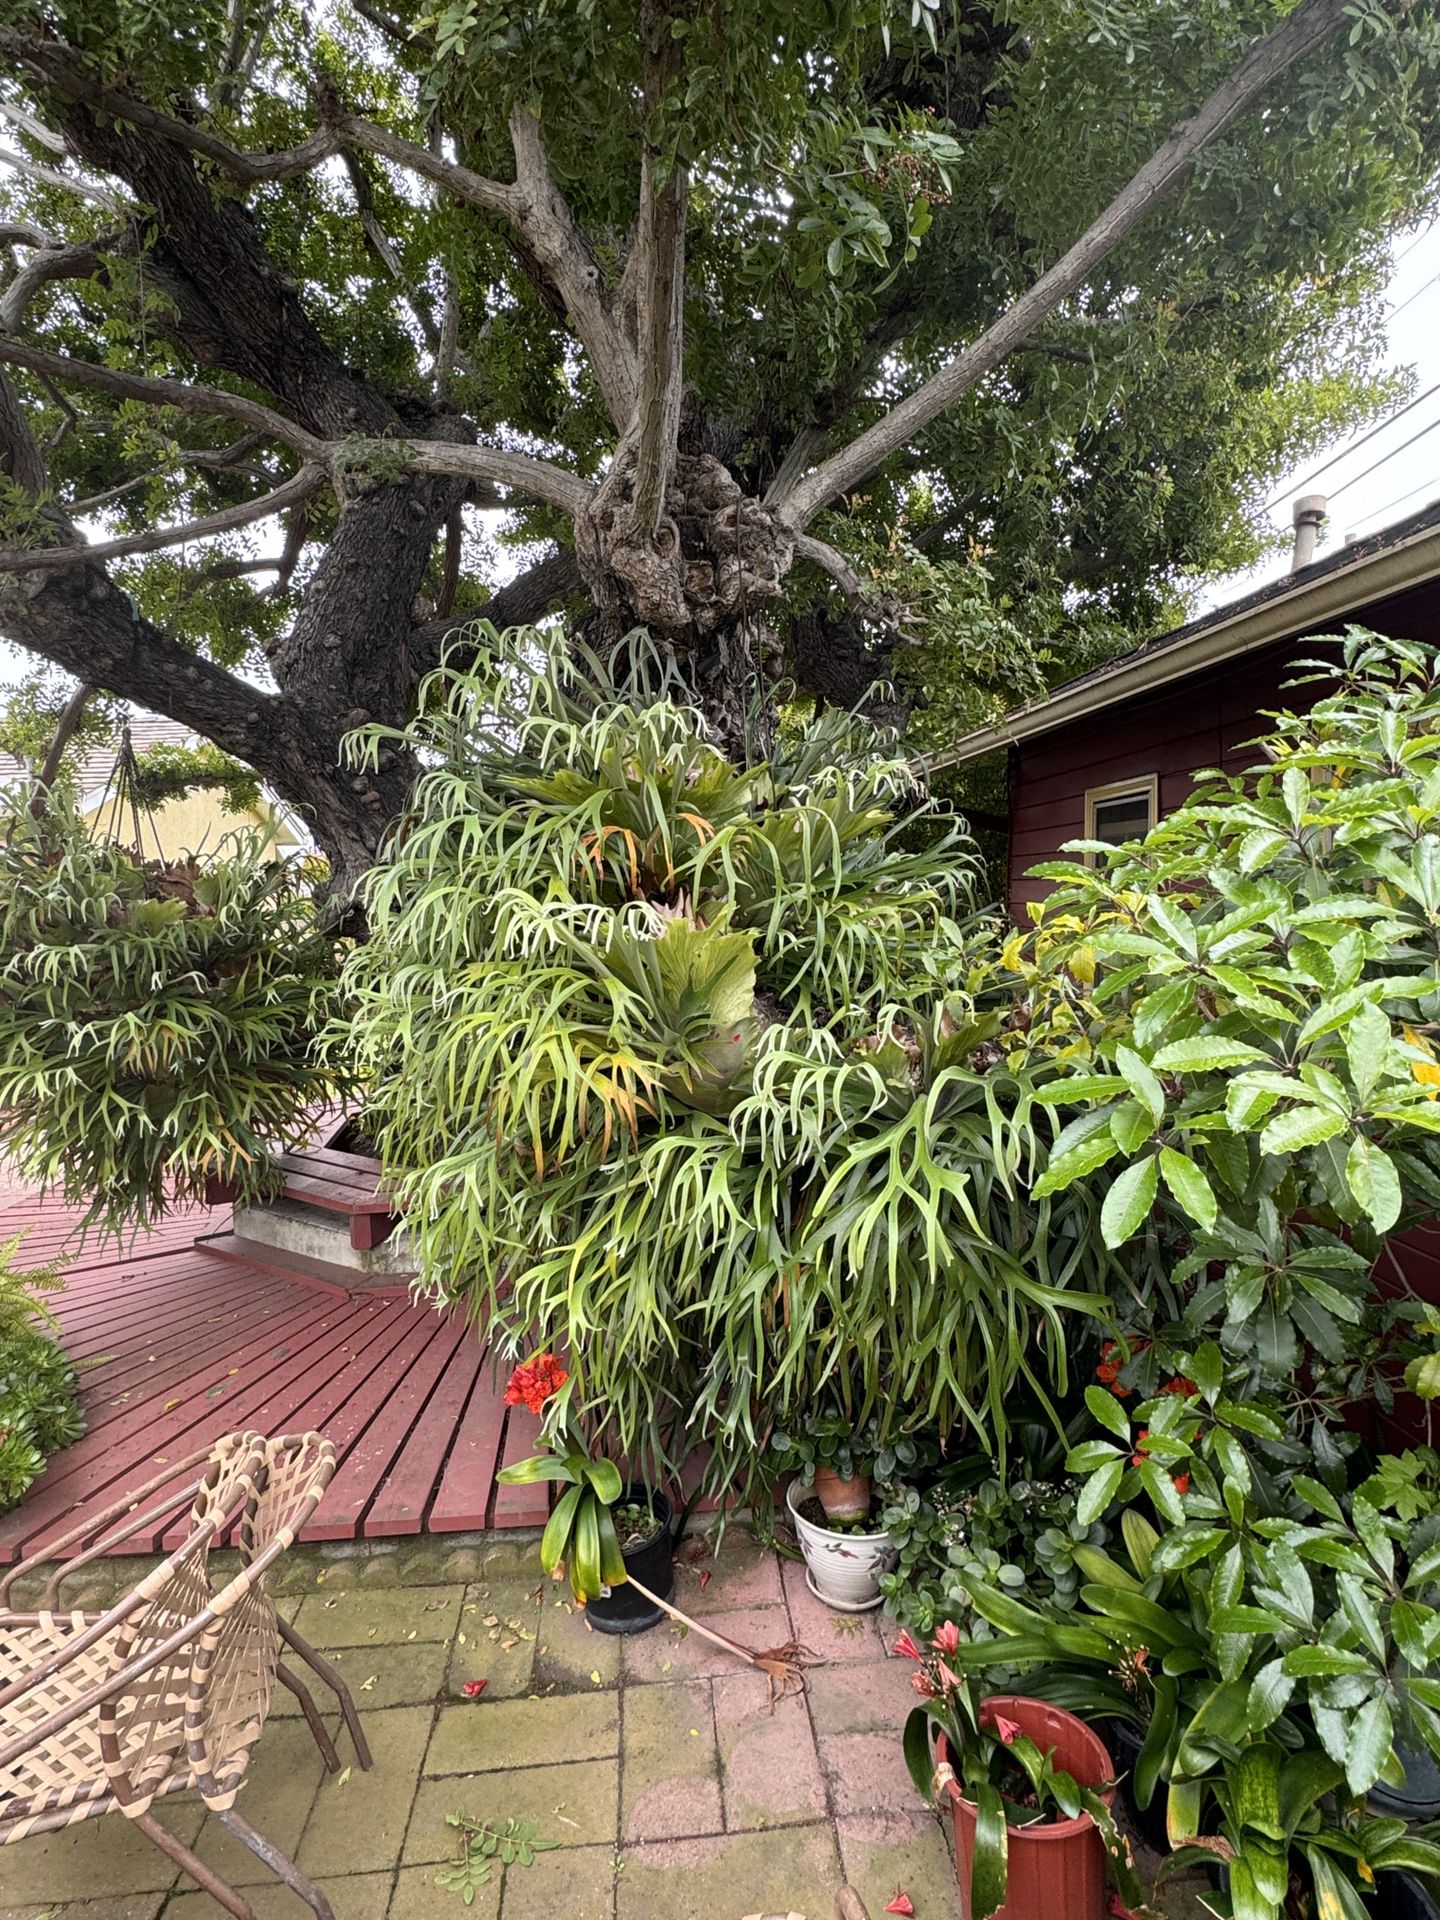 6ft STAGHORN FERN AND POTTED PLANTS!